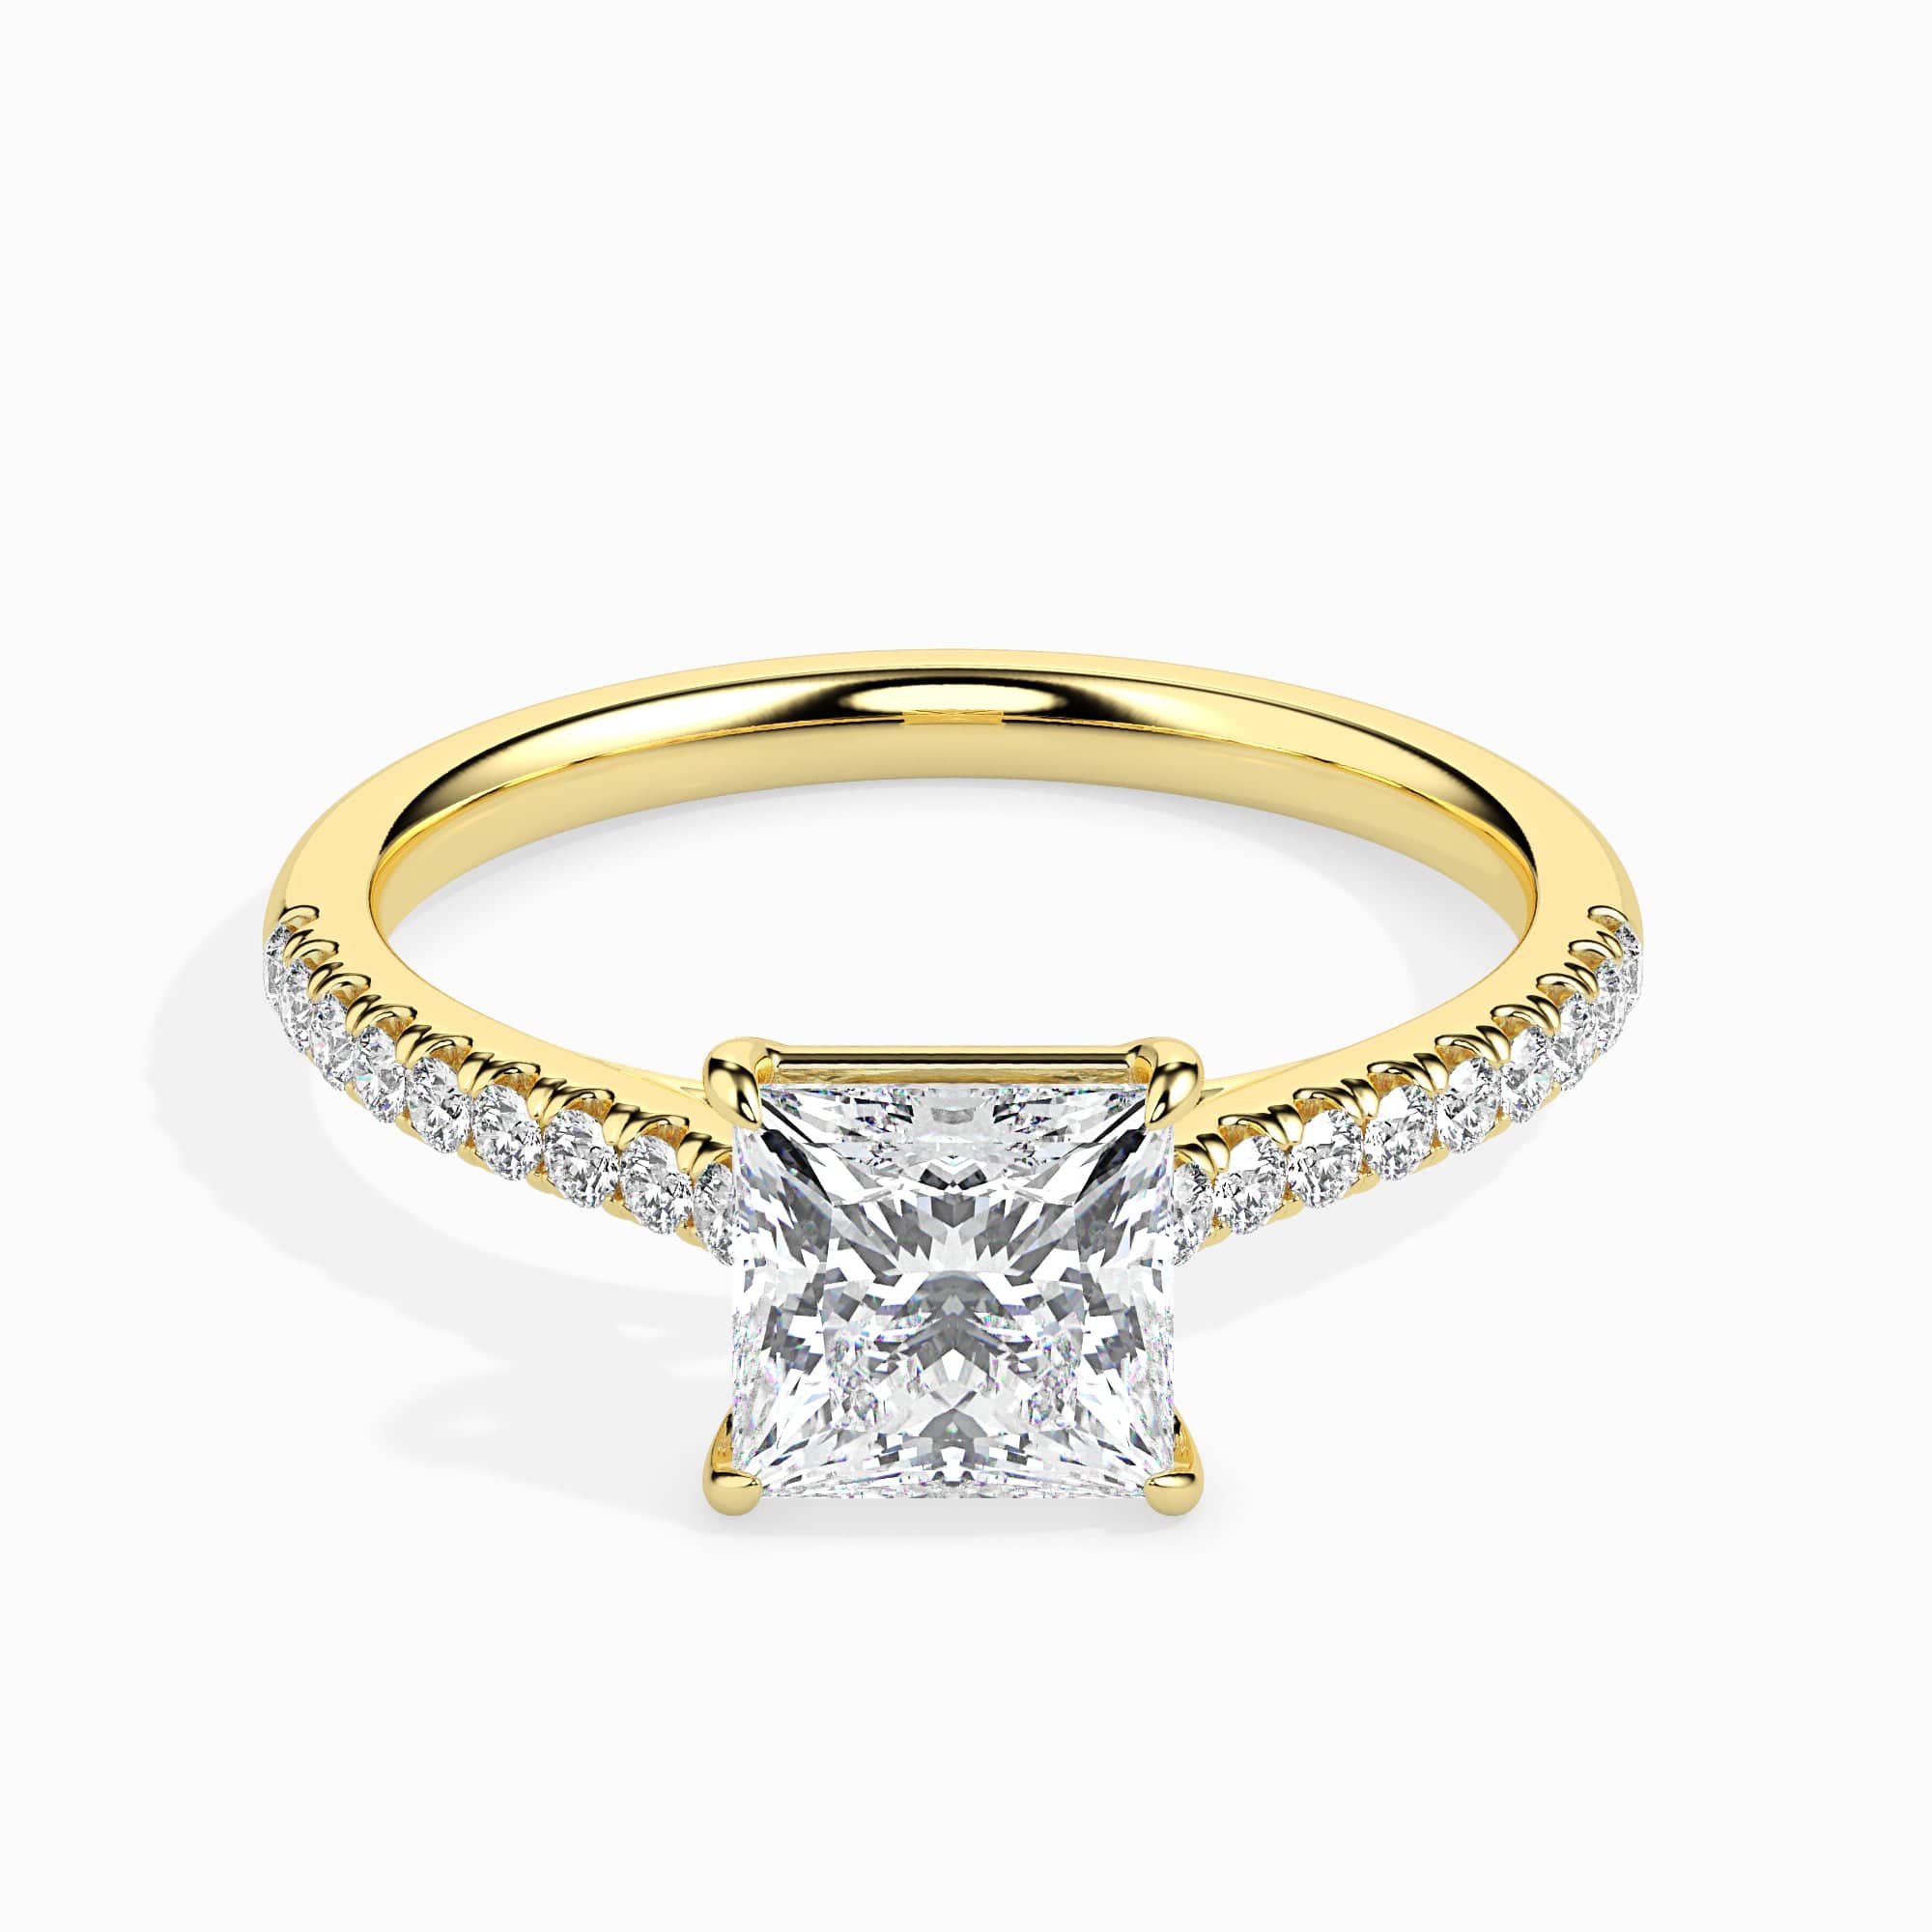 1 CT. Diamond Solitaire Engagement Ring in 14K White Gold (J/I3) | Zales